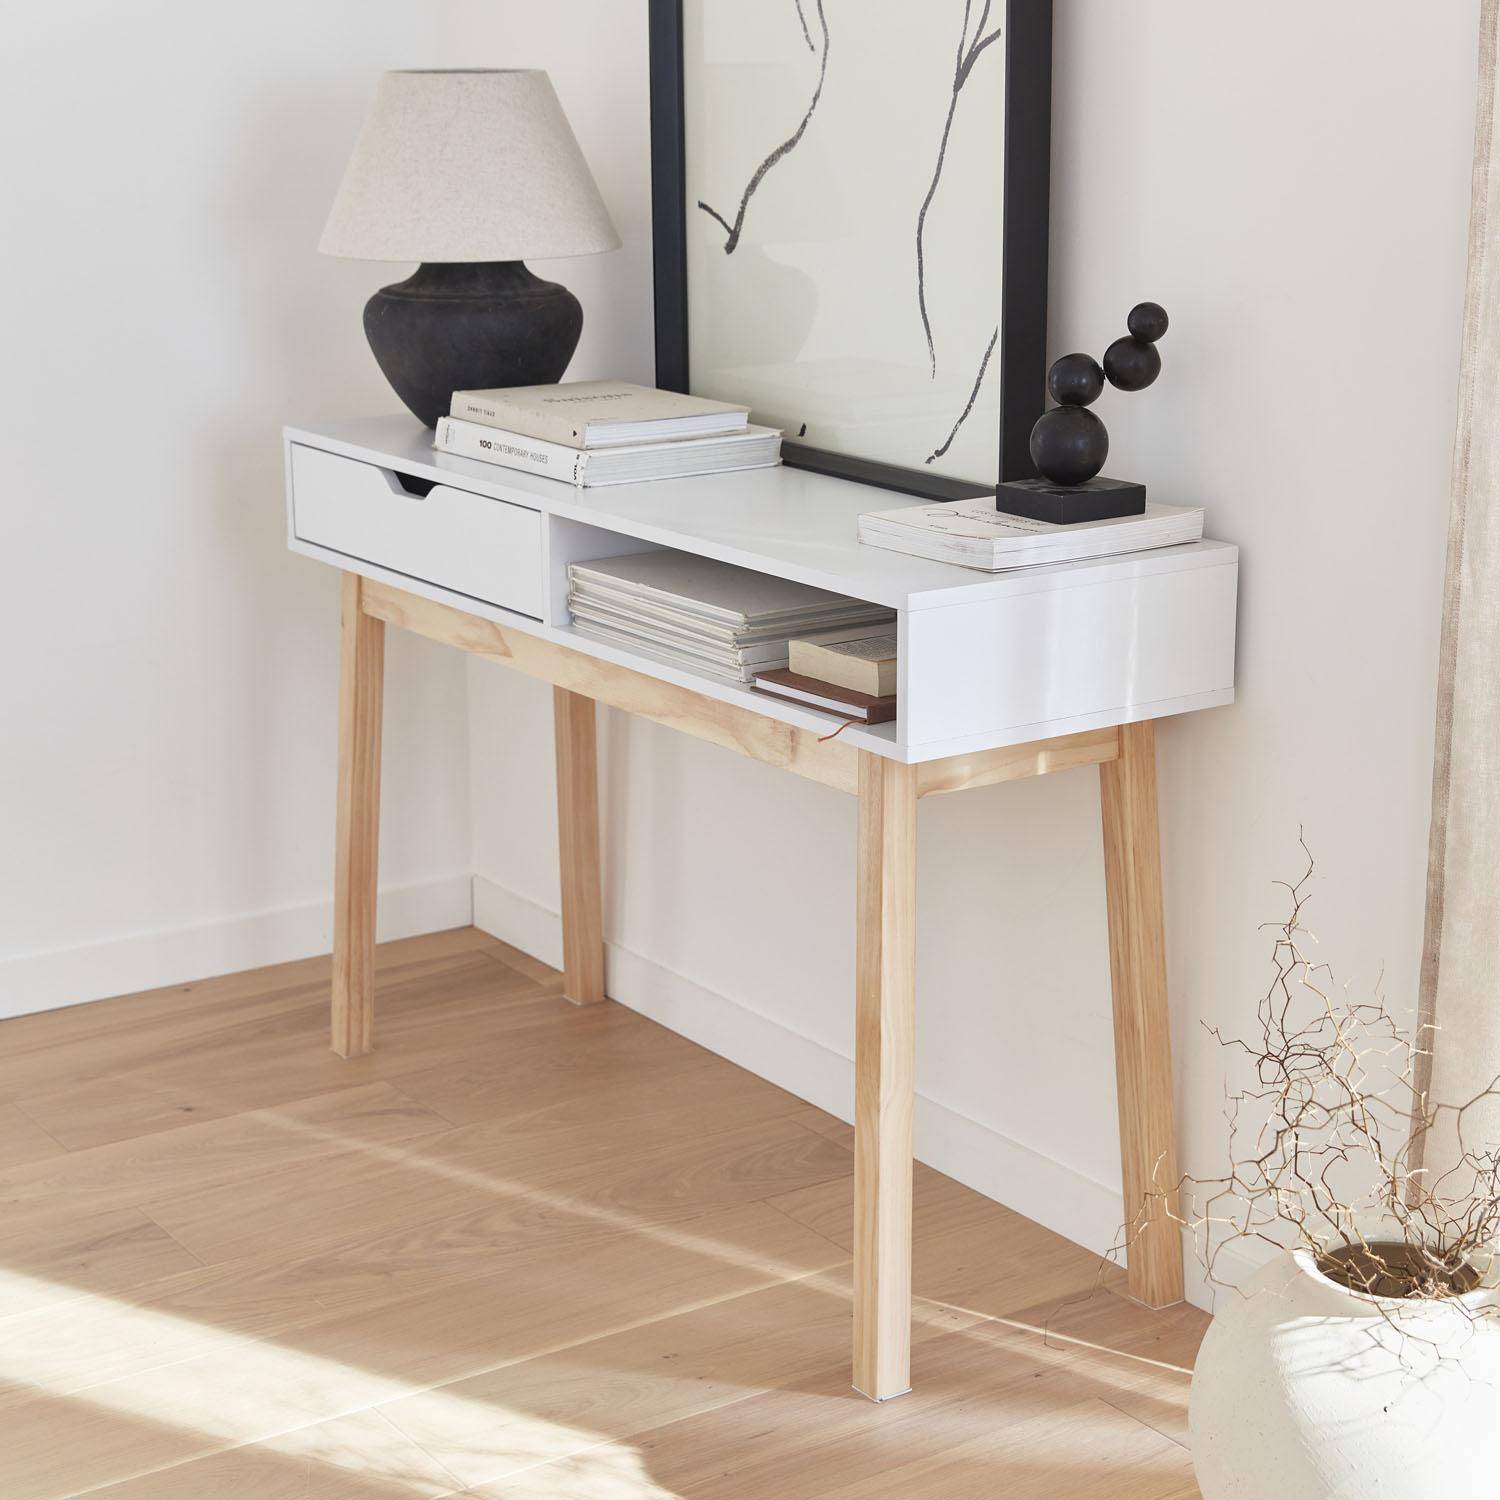 L119cm x W37cm x H74.5cm, Console with Wood Effect and Wooden Legs, 1 Drawer, white,  Photo2